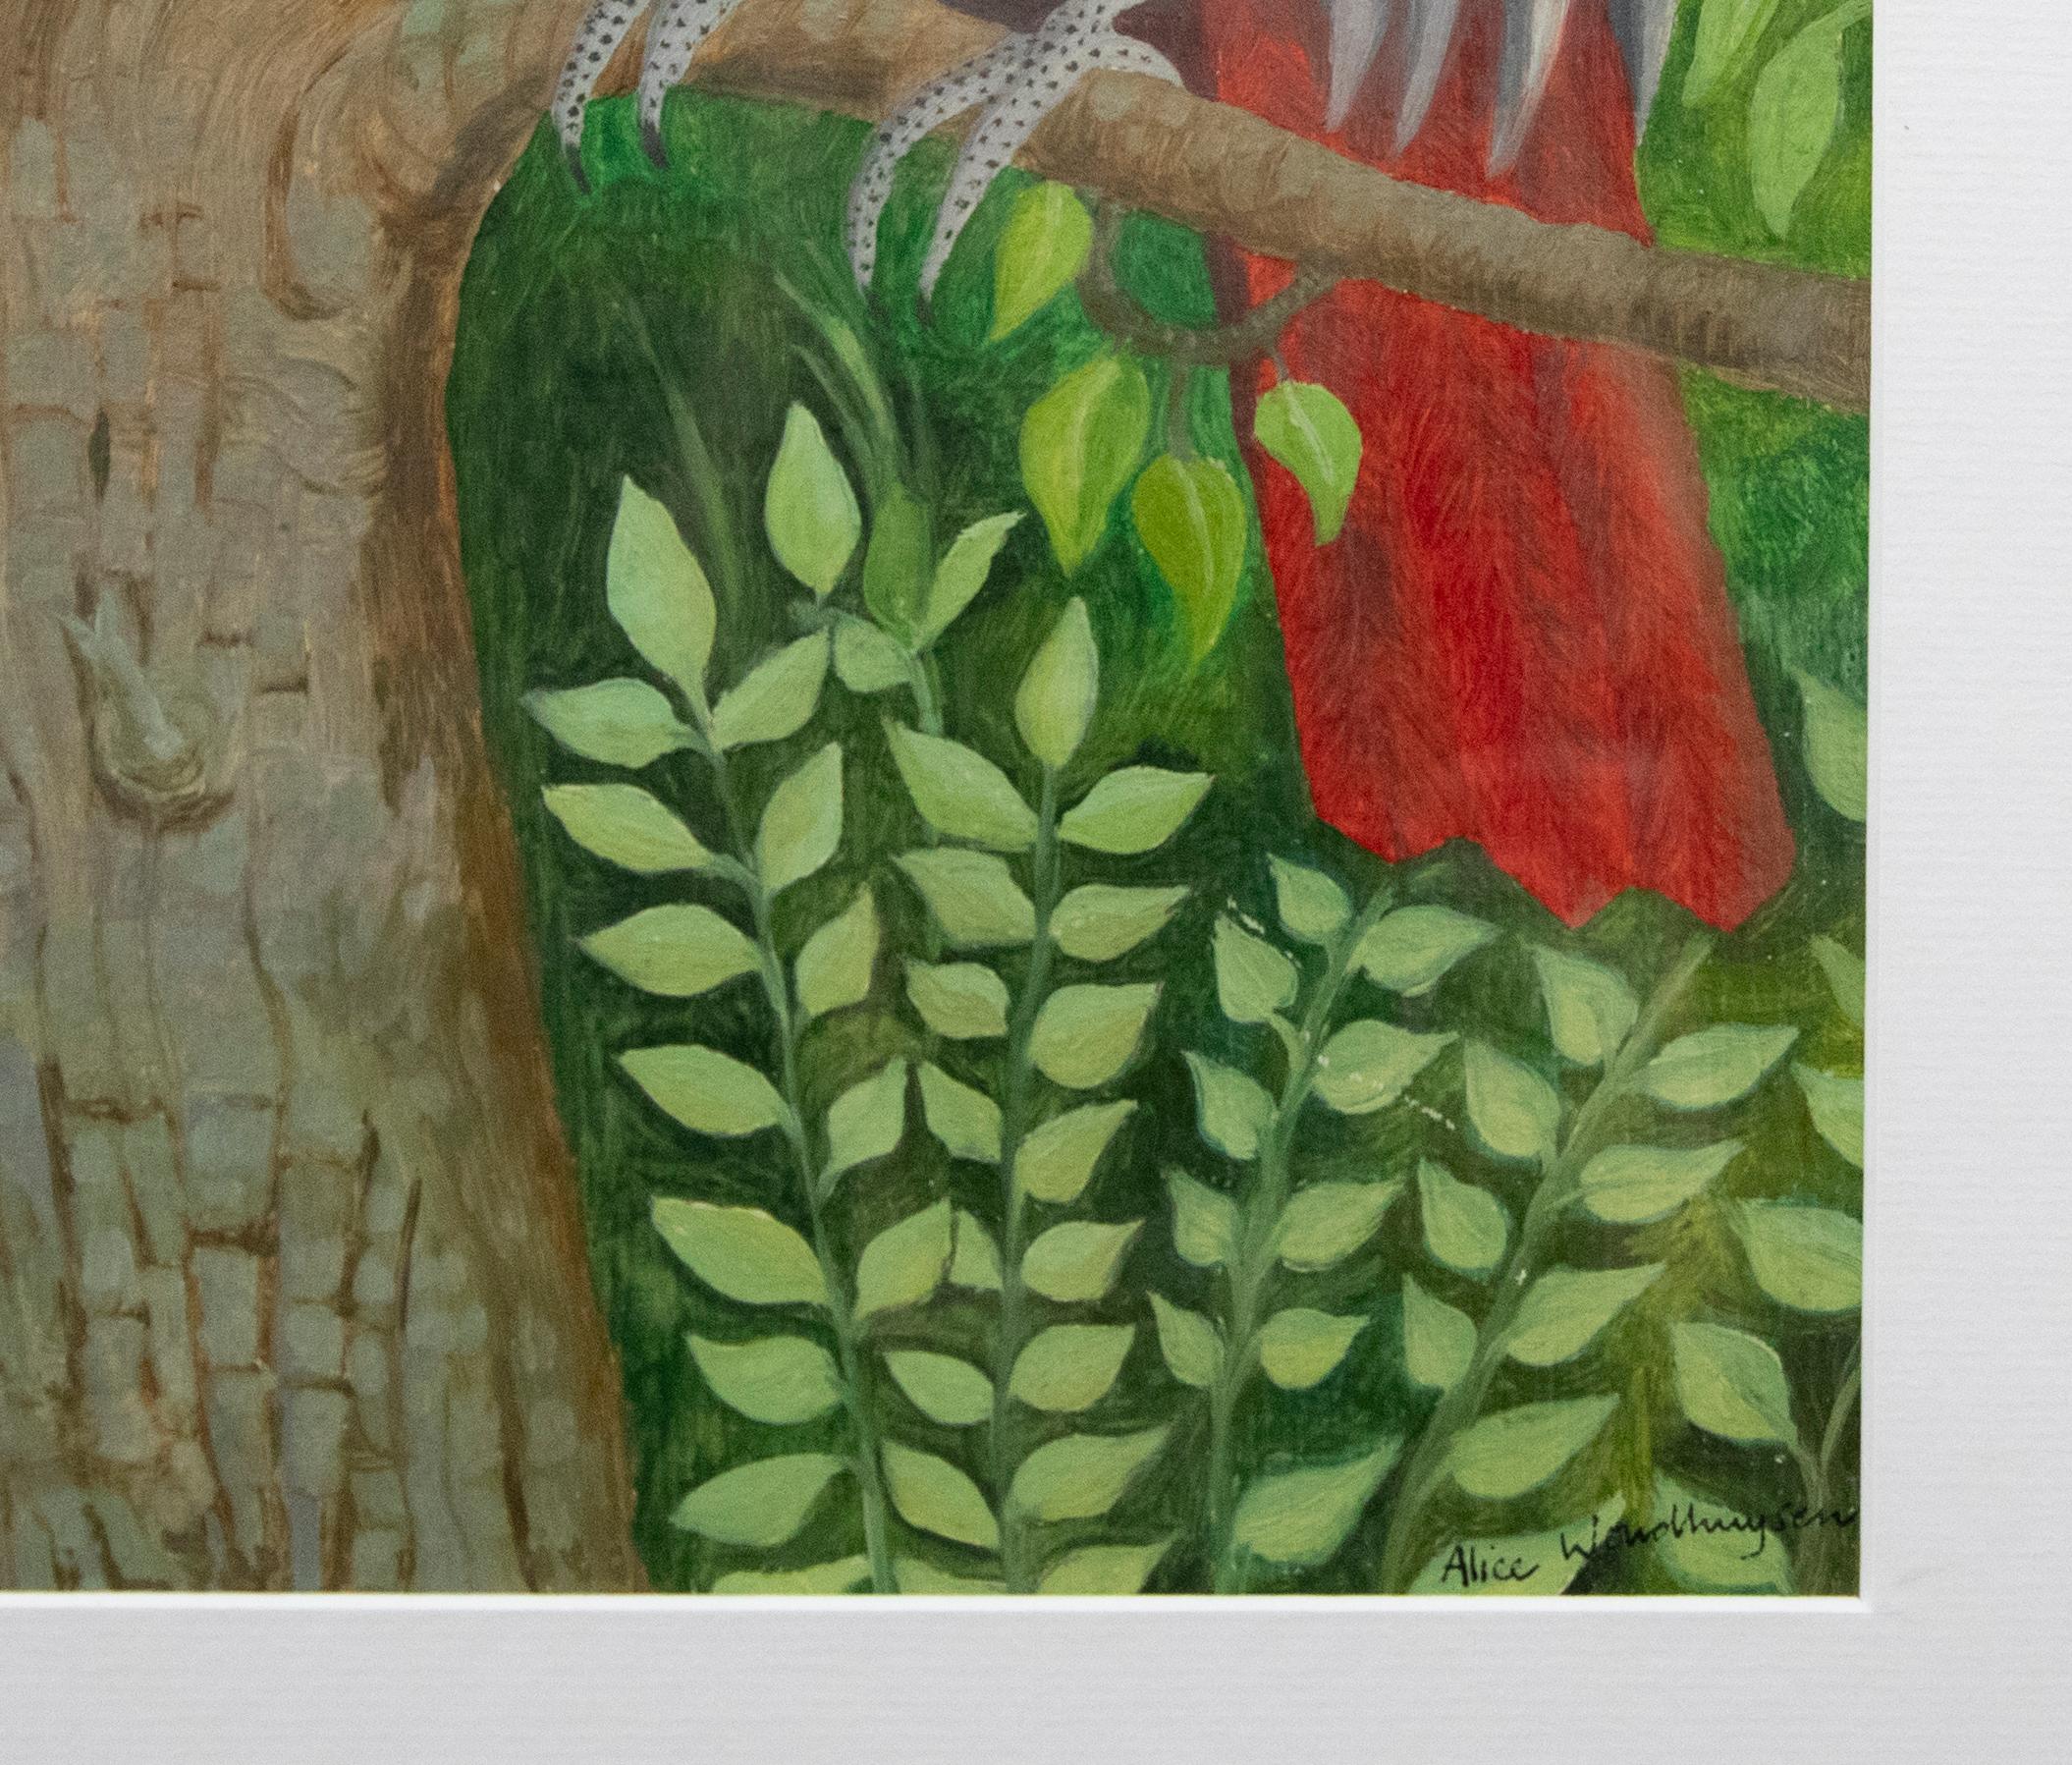 A wonderfully vibrant oil study of a African Grey parrot perched in a pear tree, just out of reach from a praying tabby cat. The composition has been executed in a naive artistic style with oodles of illustrative charm. Well-presented in a beautiful